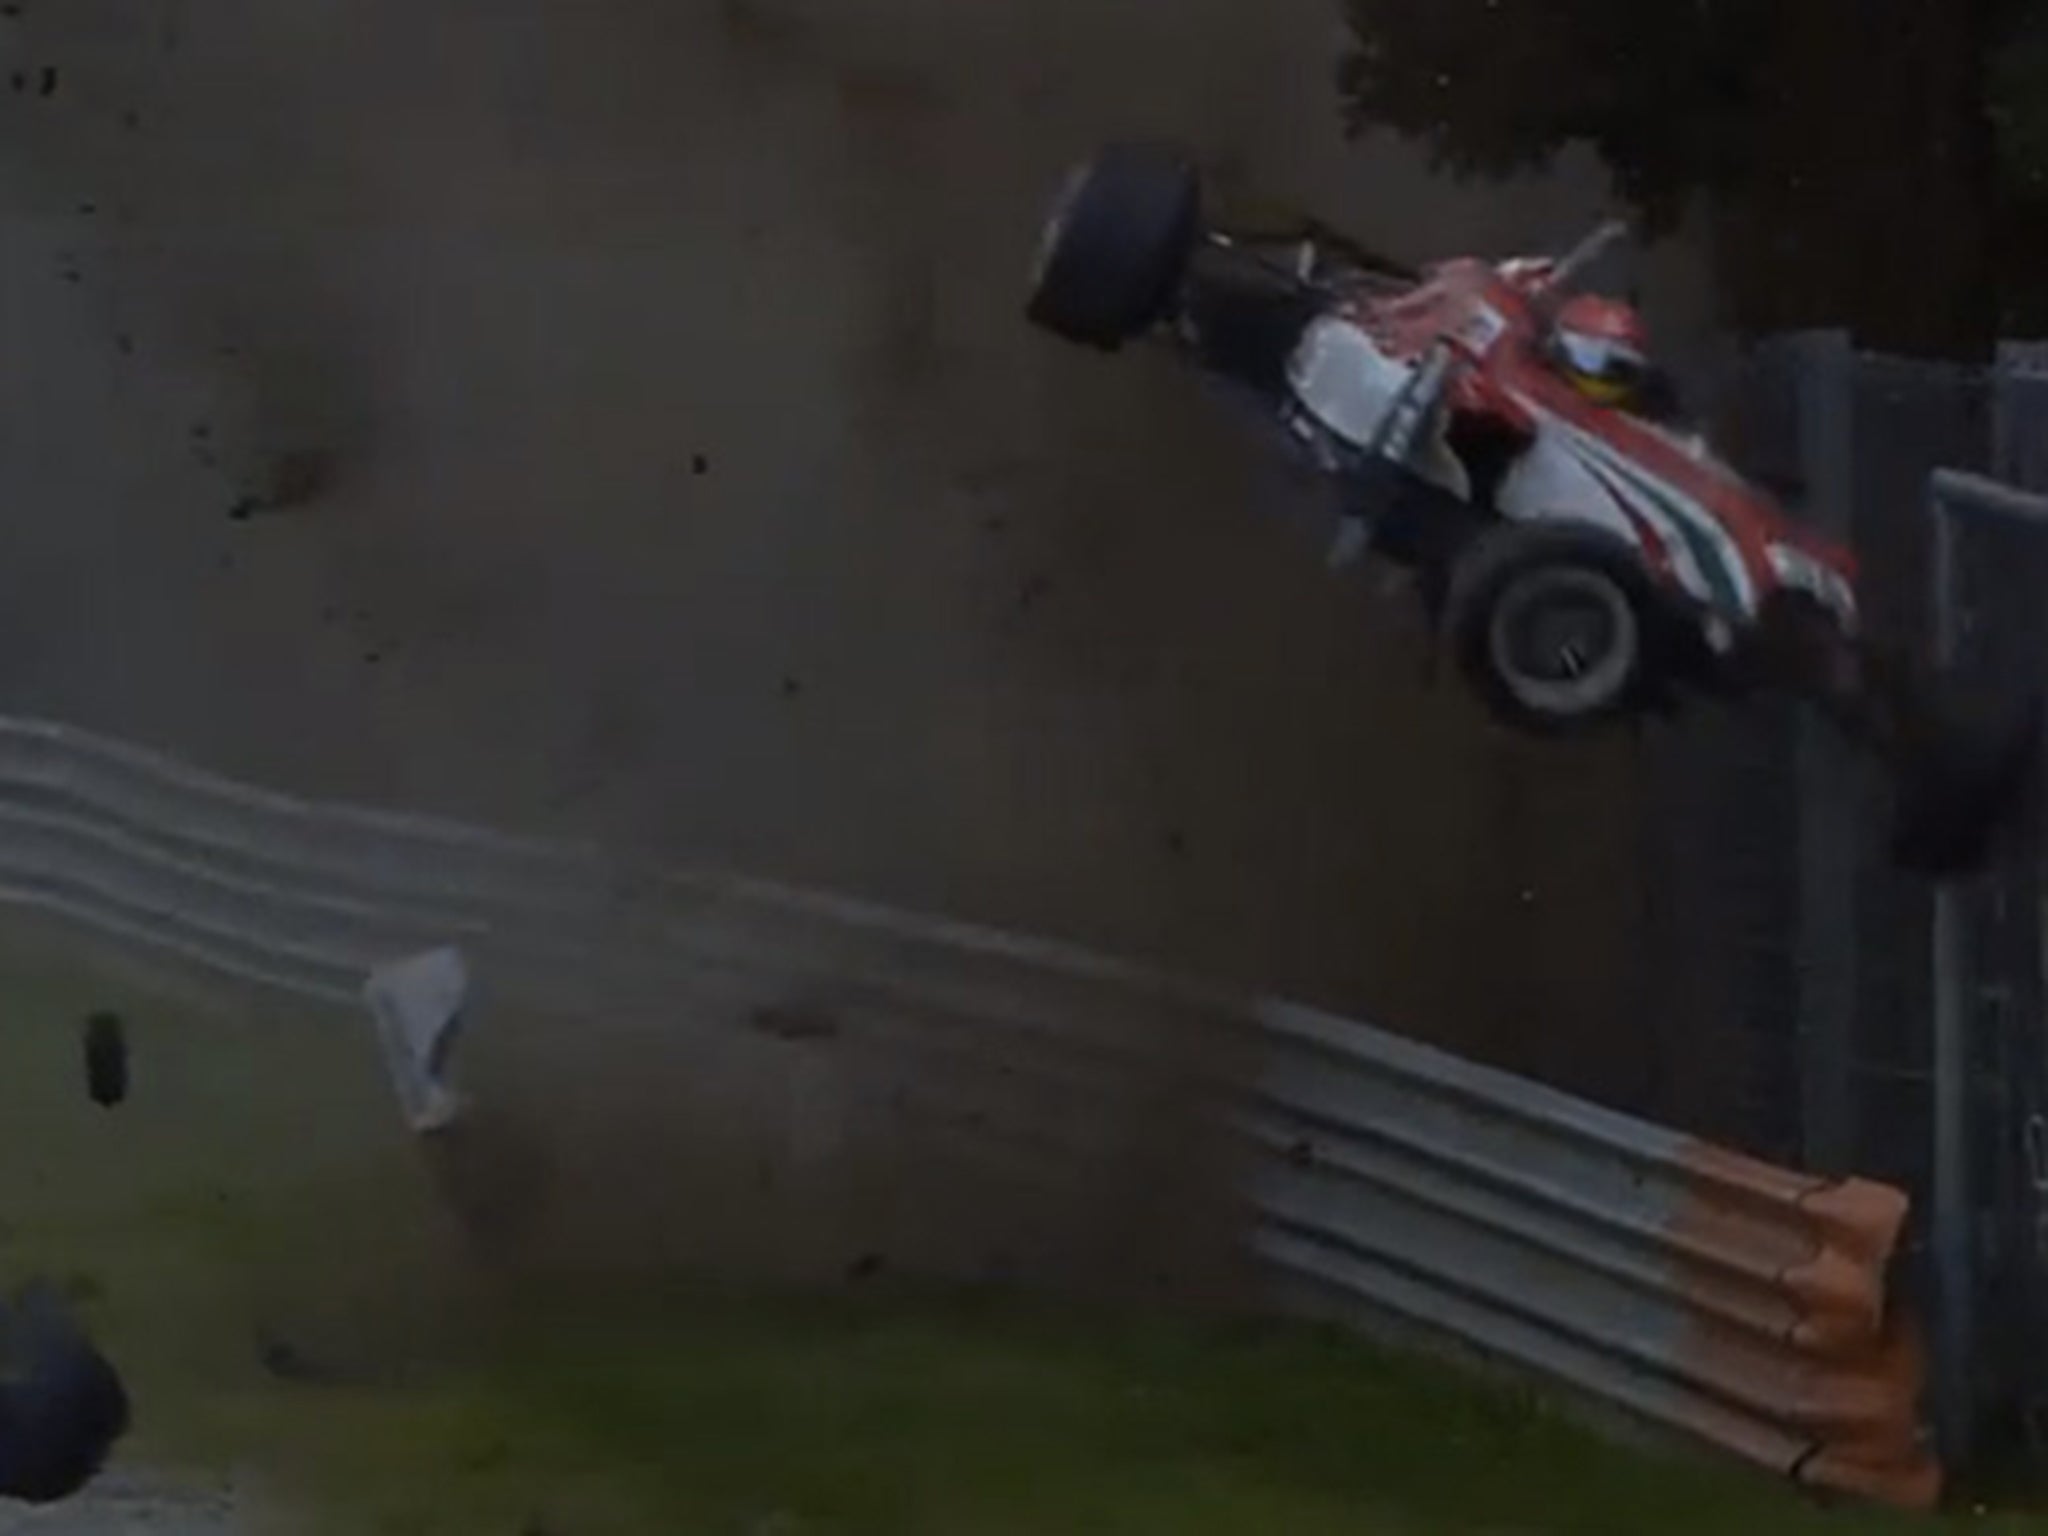 Stroll flies into the safety barrier before coming back down to earth